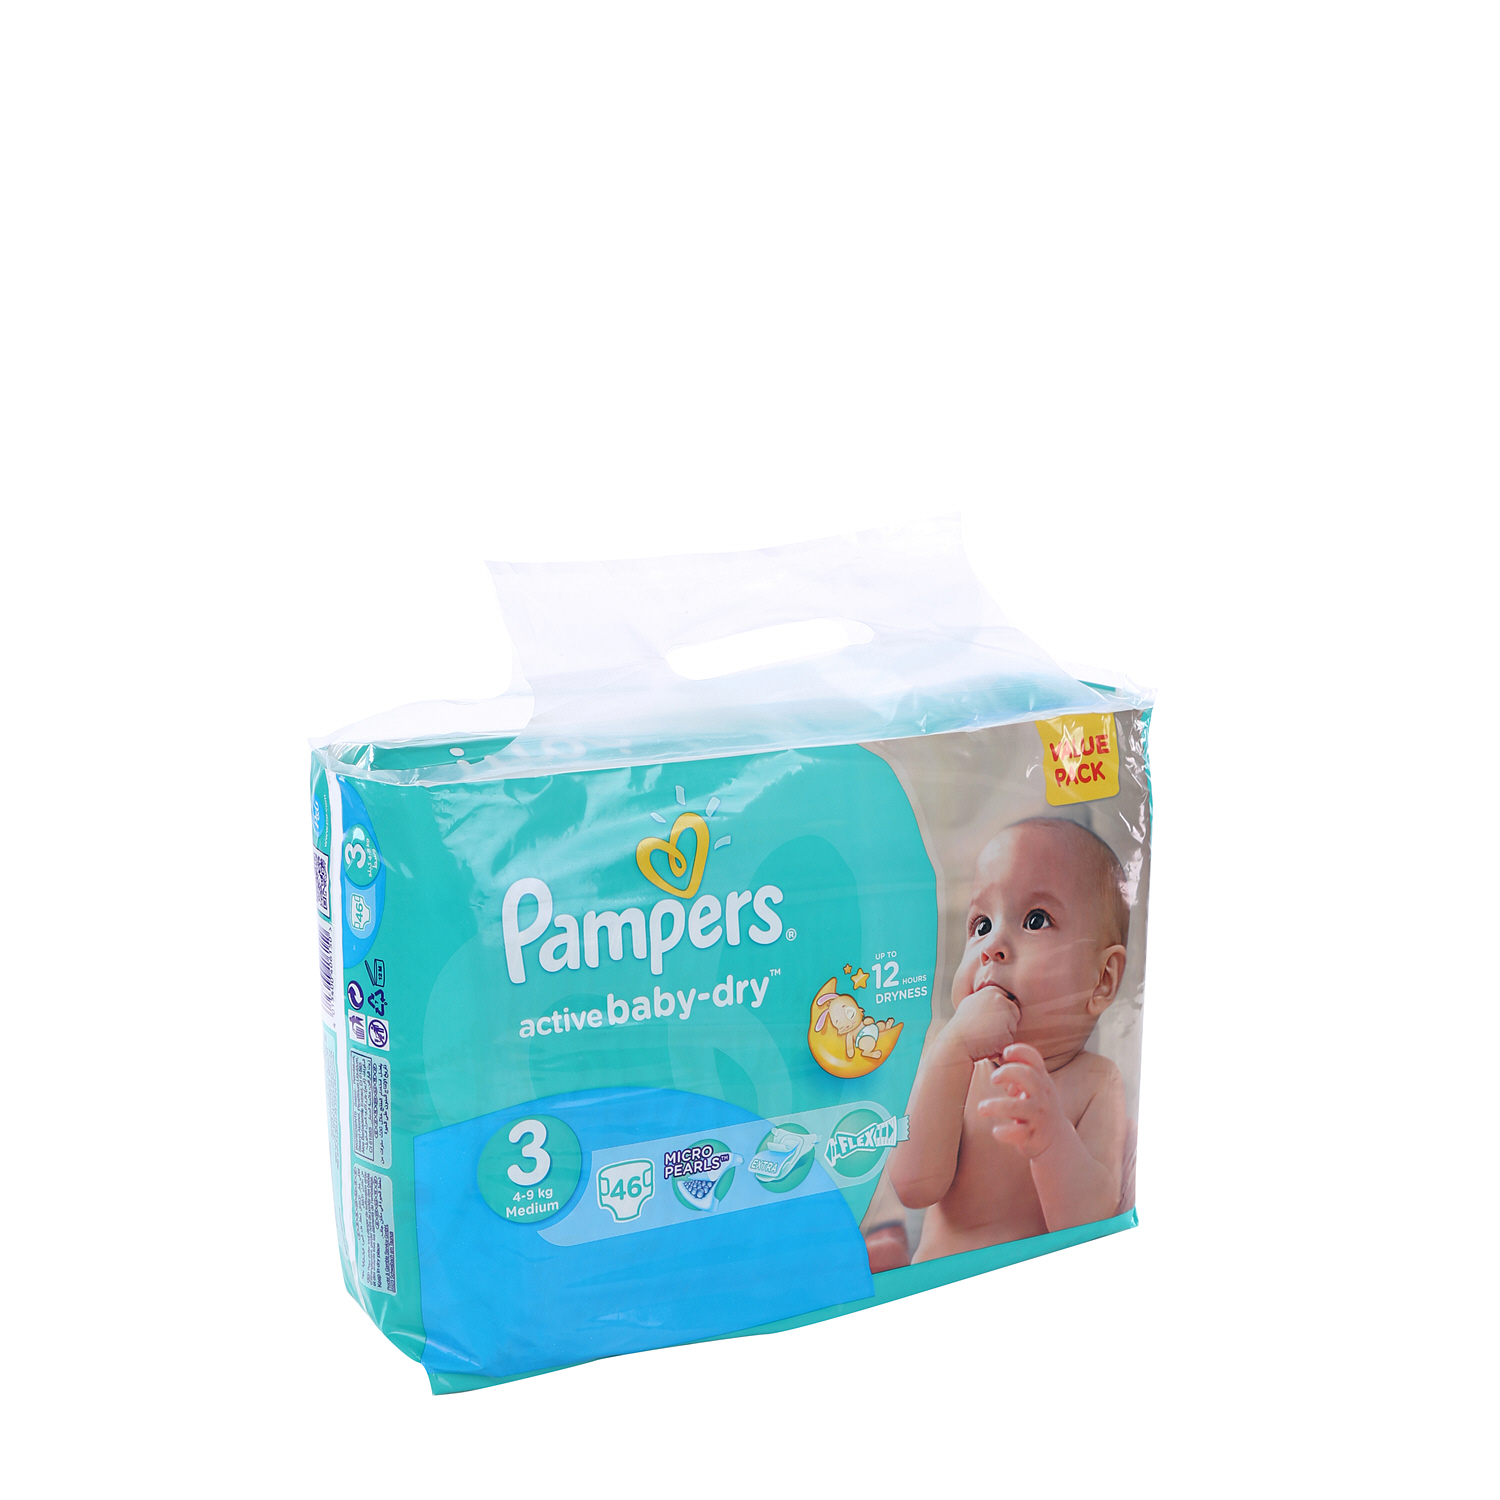 Pampers Active Baby Value Pack Midi 46 Pieces